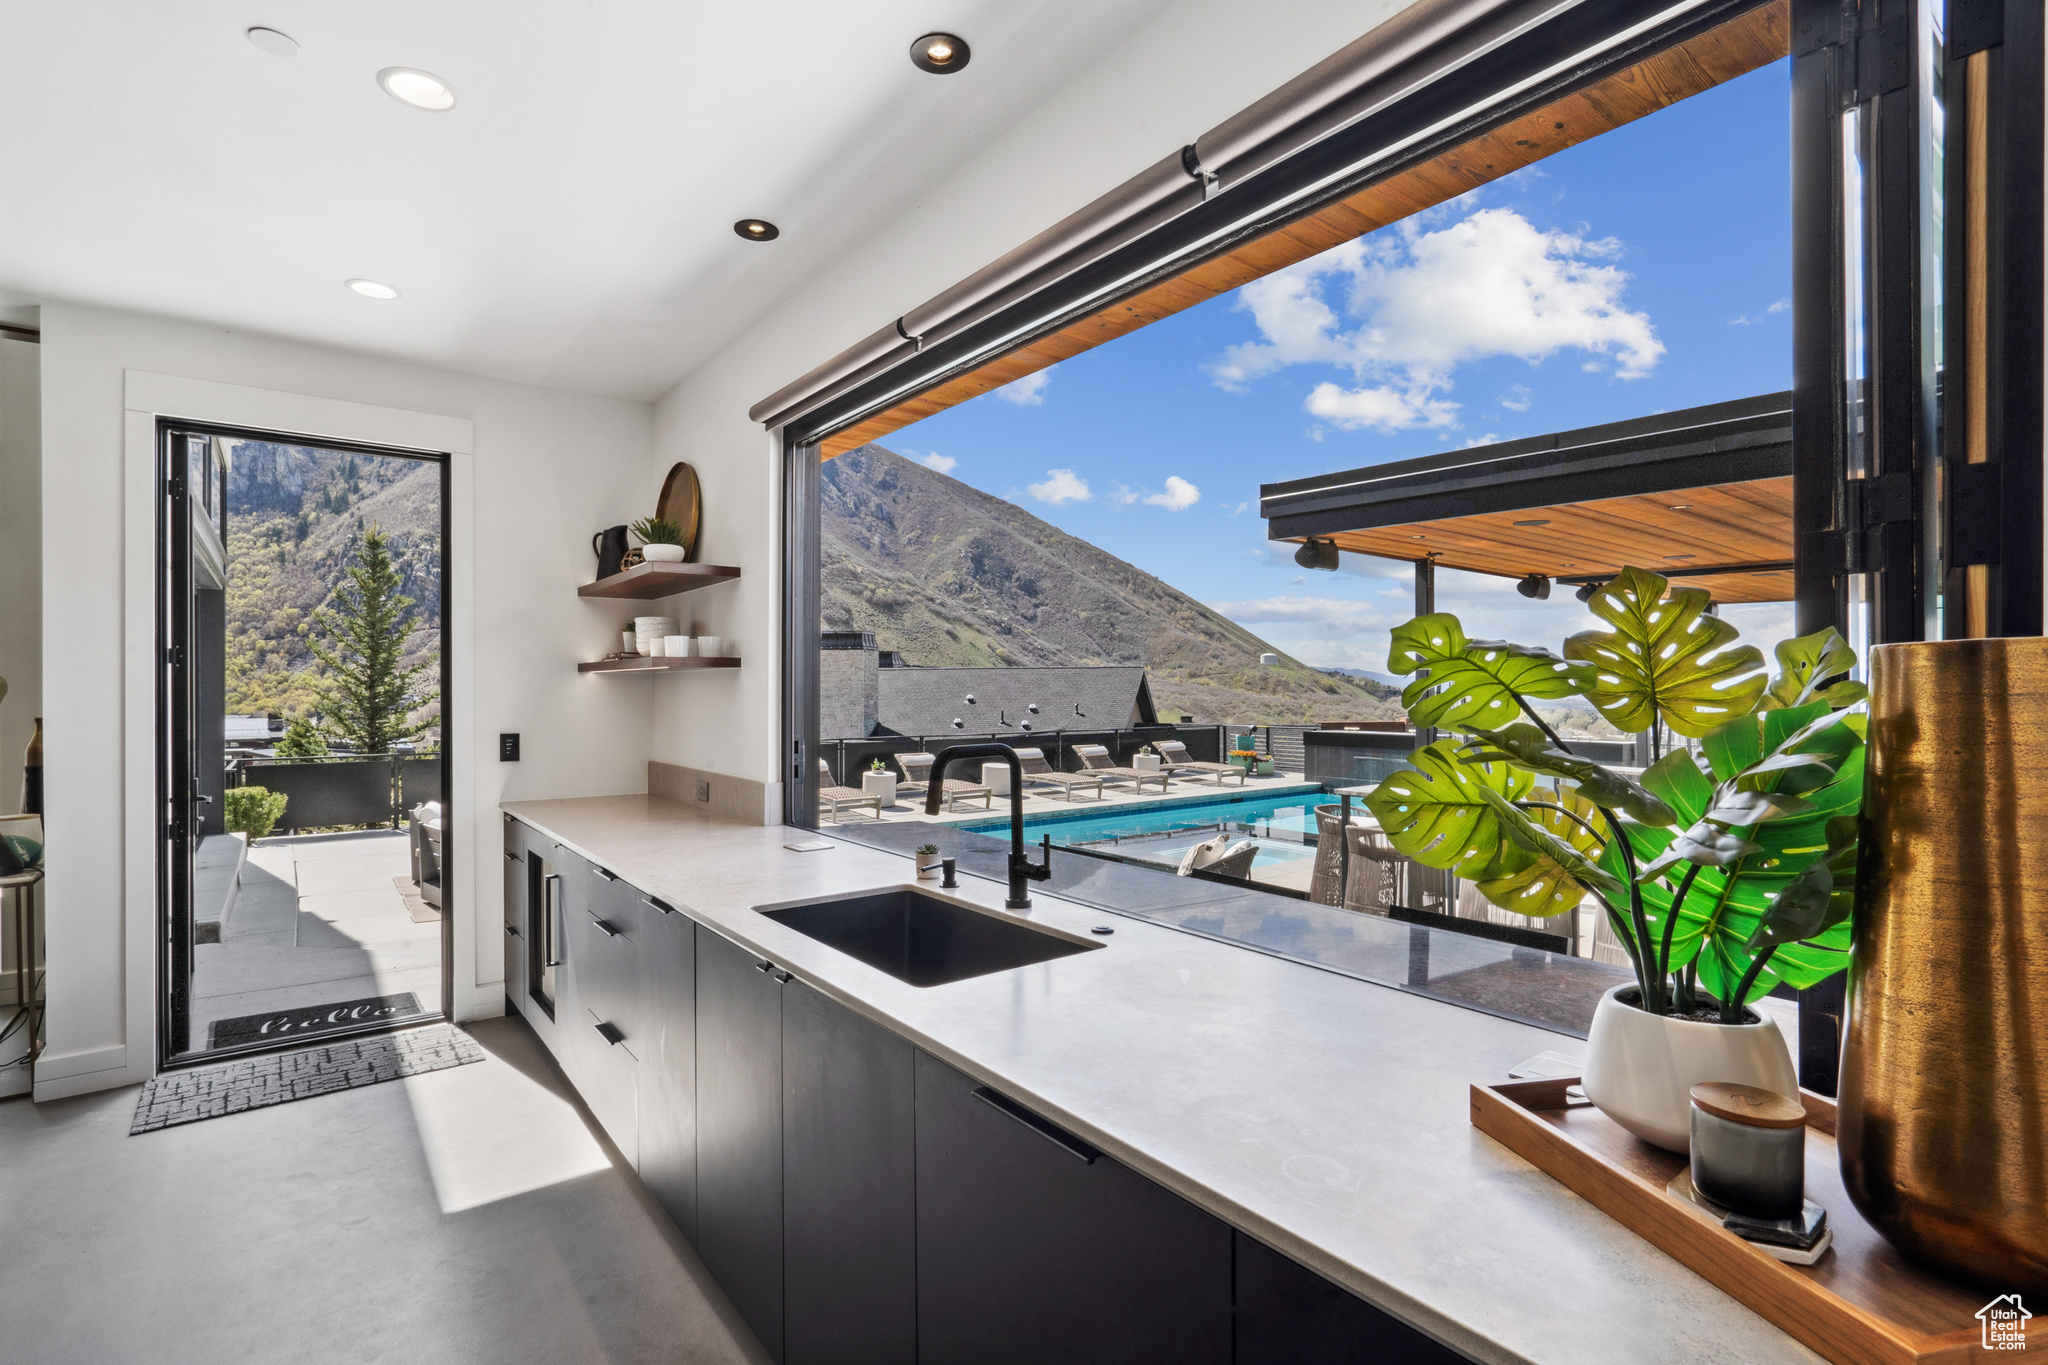 Kitchen Window Completely Opens To Outdoor Entertainment Pool Area